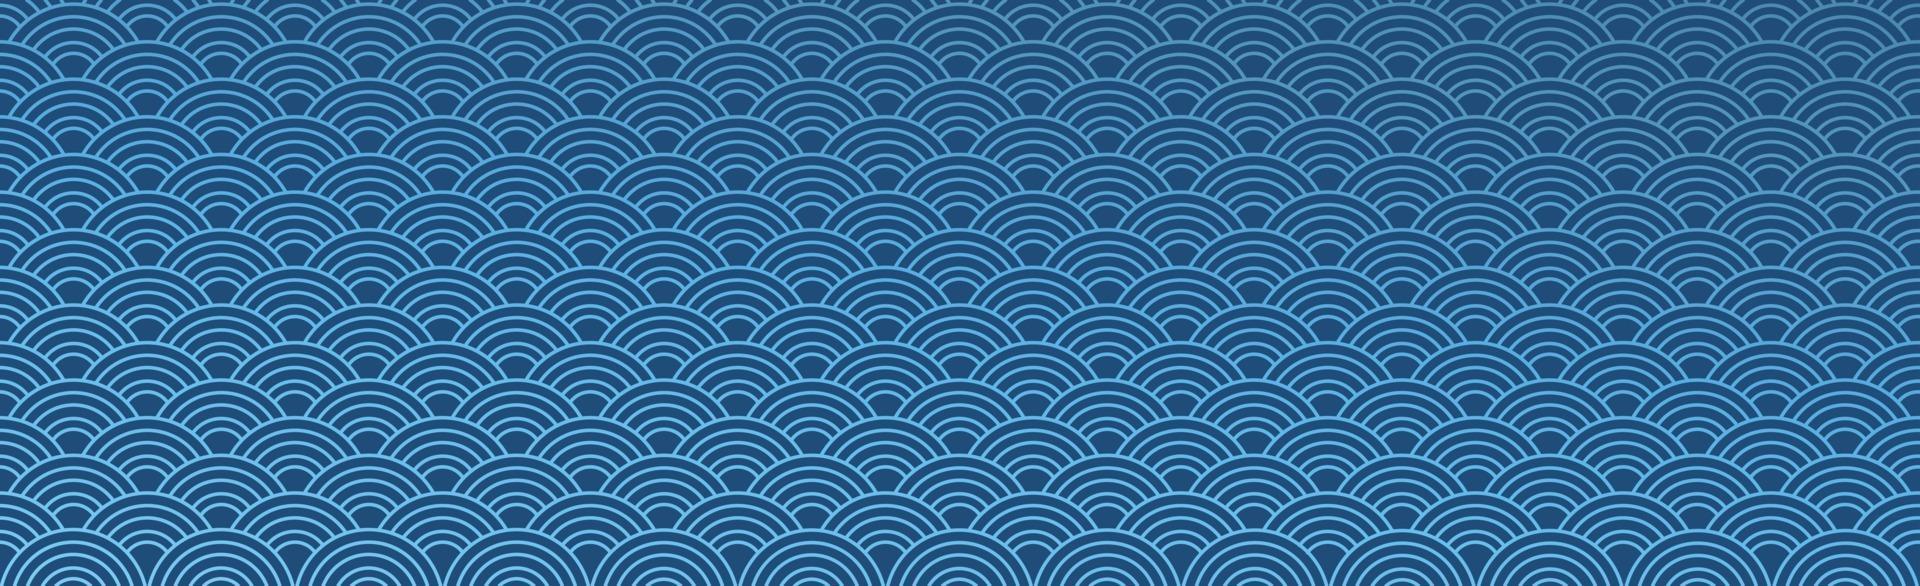 Semicircular repeating ornament, blue abstract background pattern - Vector